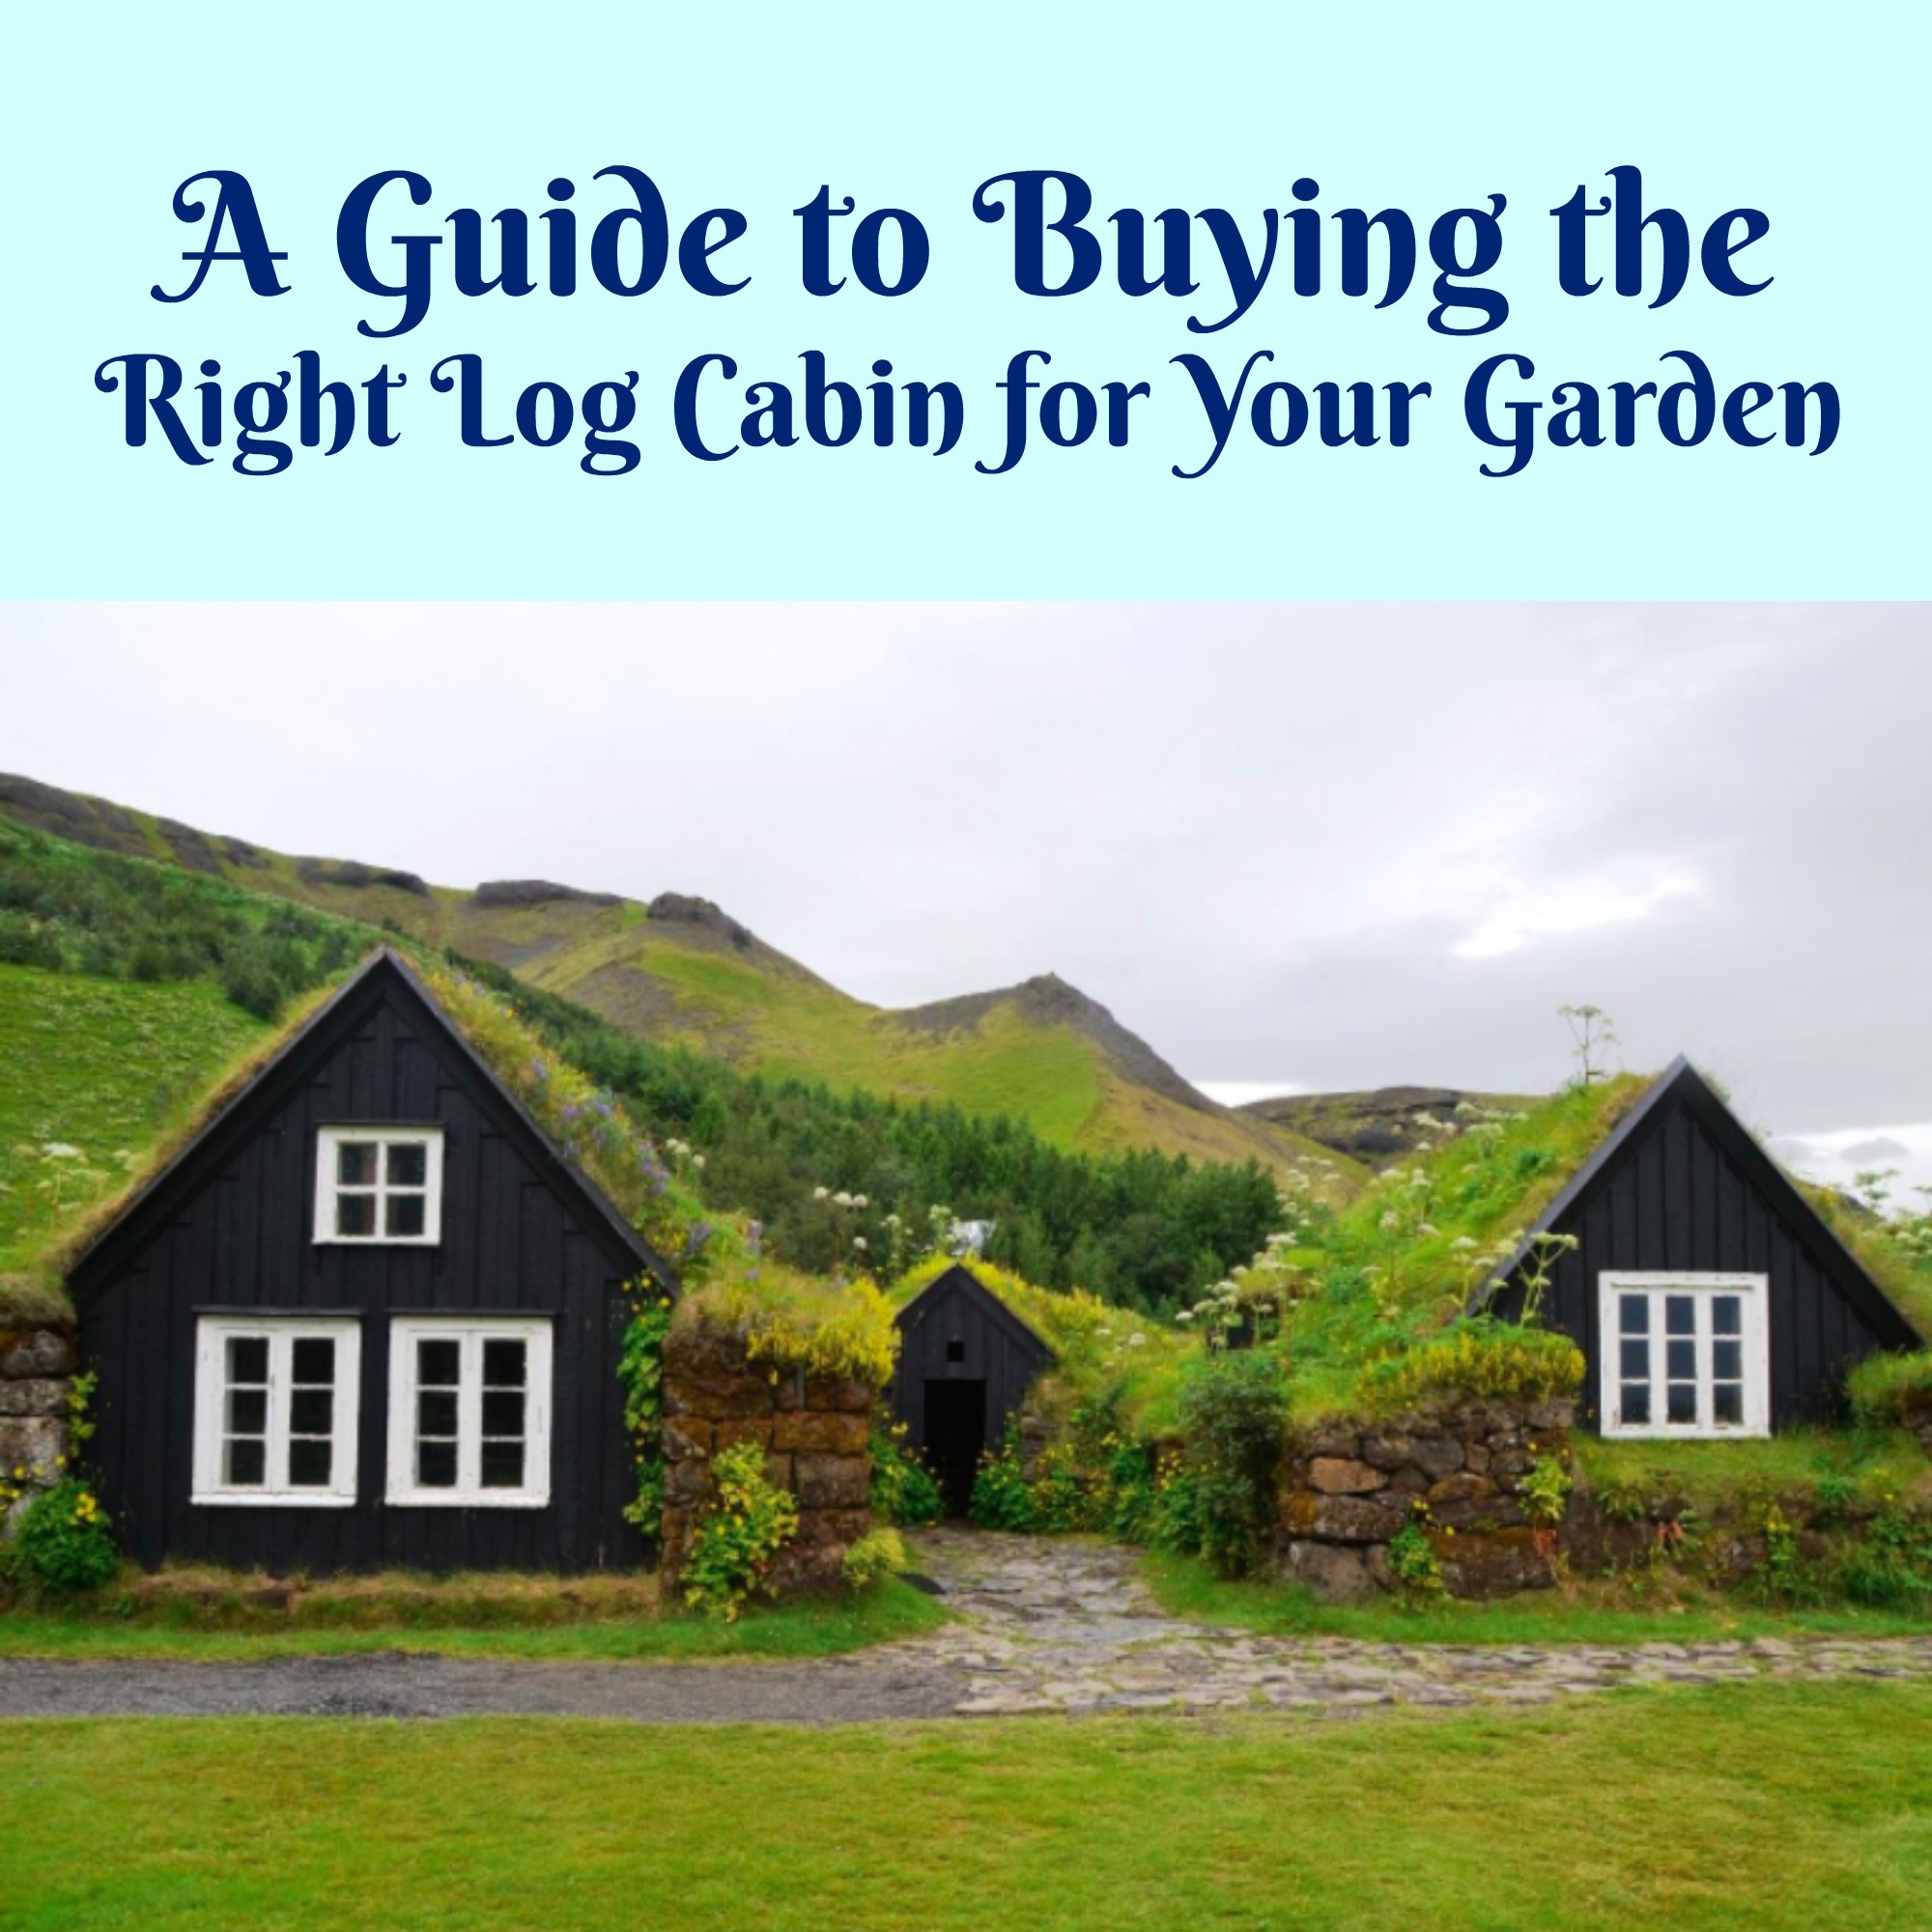 A Guide to Buying the Right Log Cabin for Your Garden